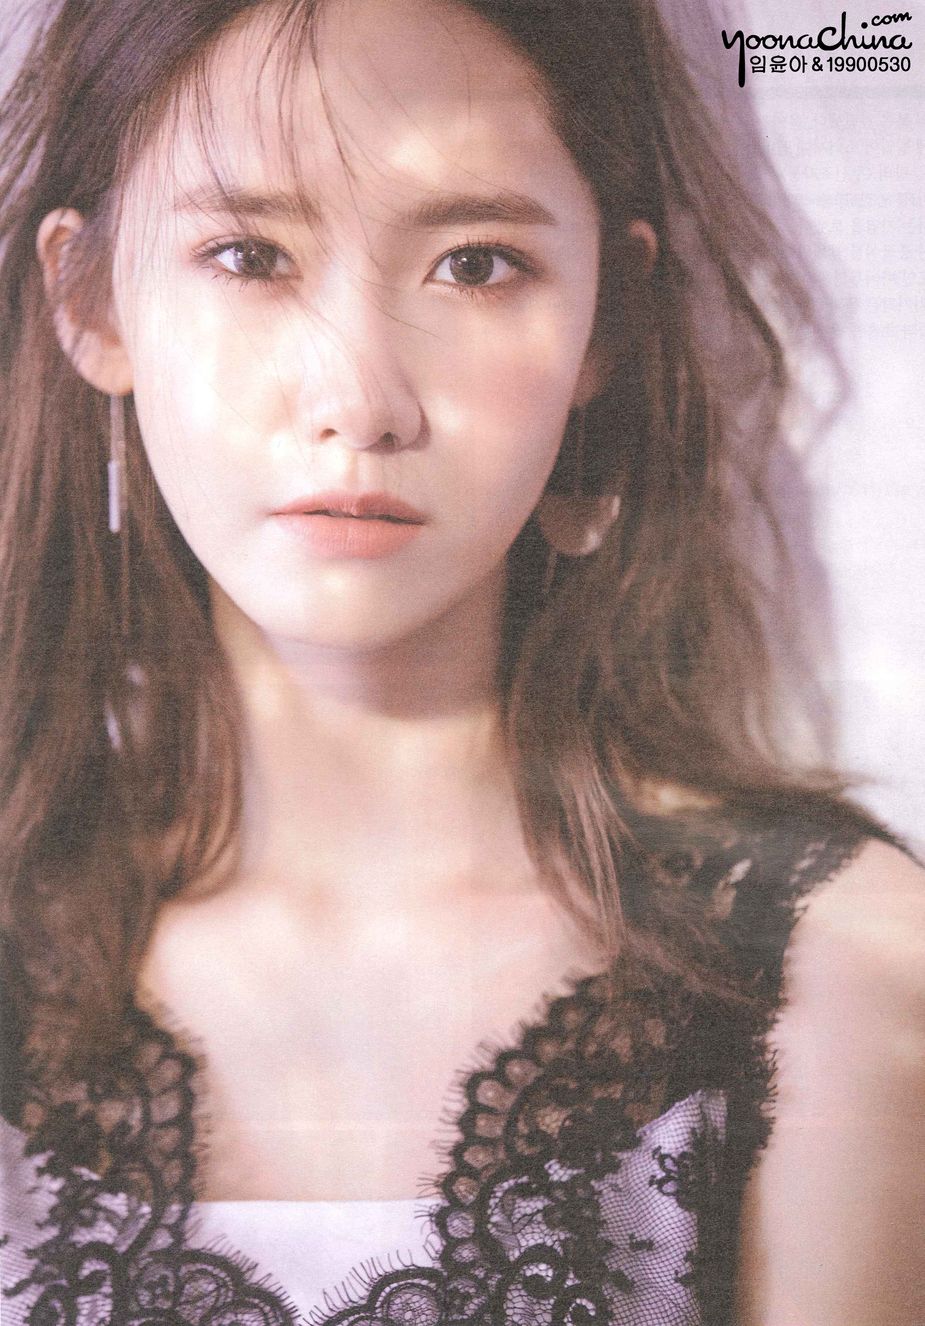 Girls Generation S Yoona Shows A Different Side Of Herself With Latest Pictorial For High Cut